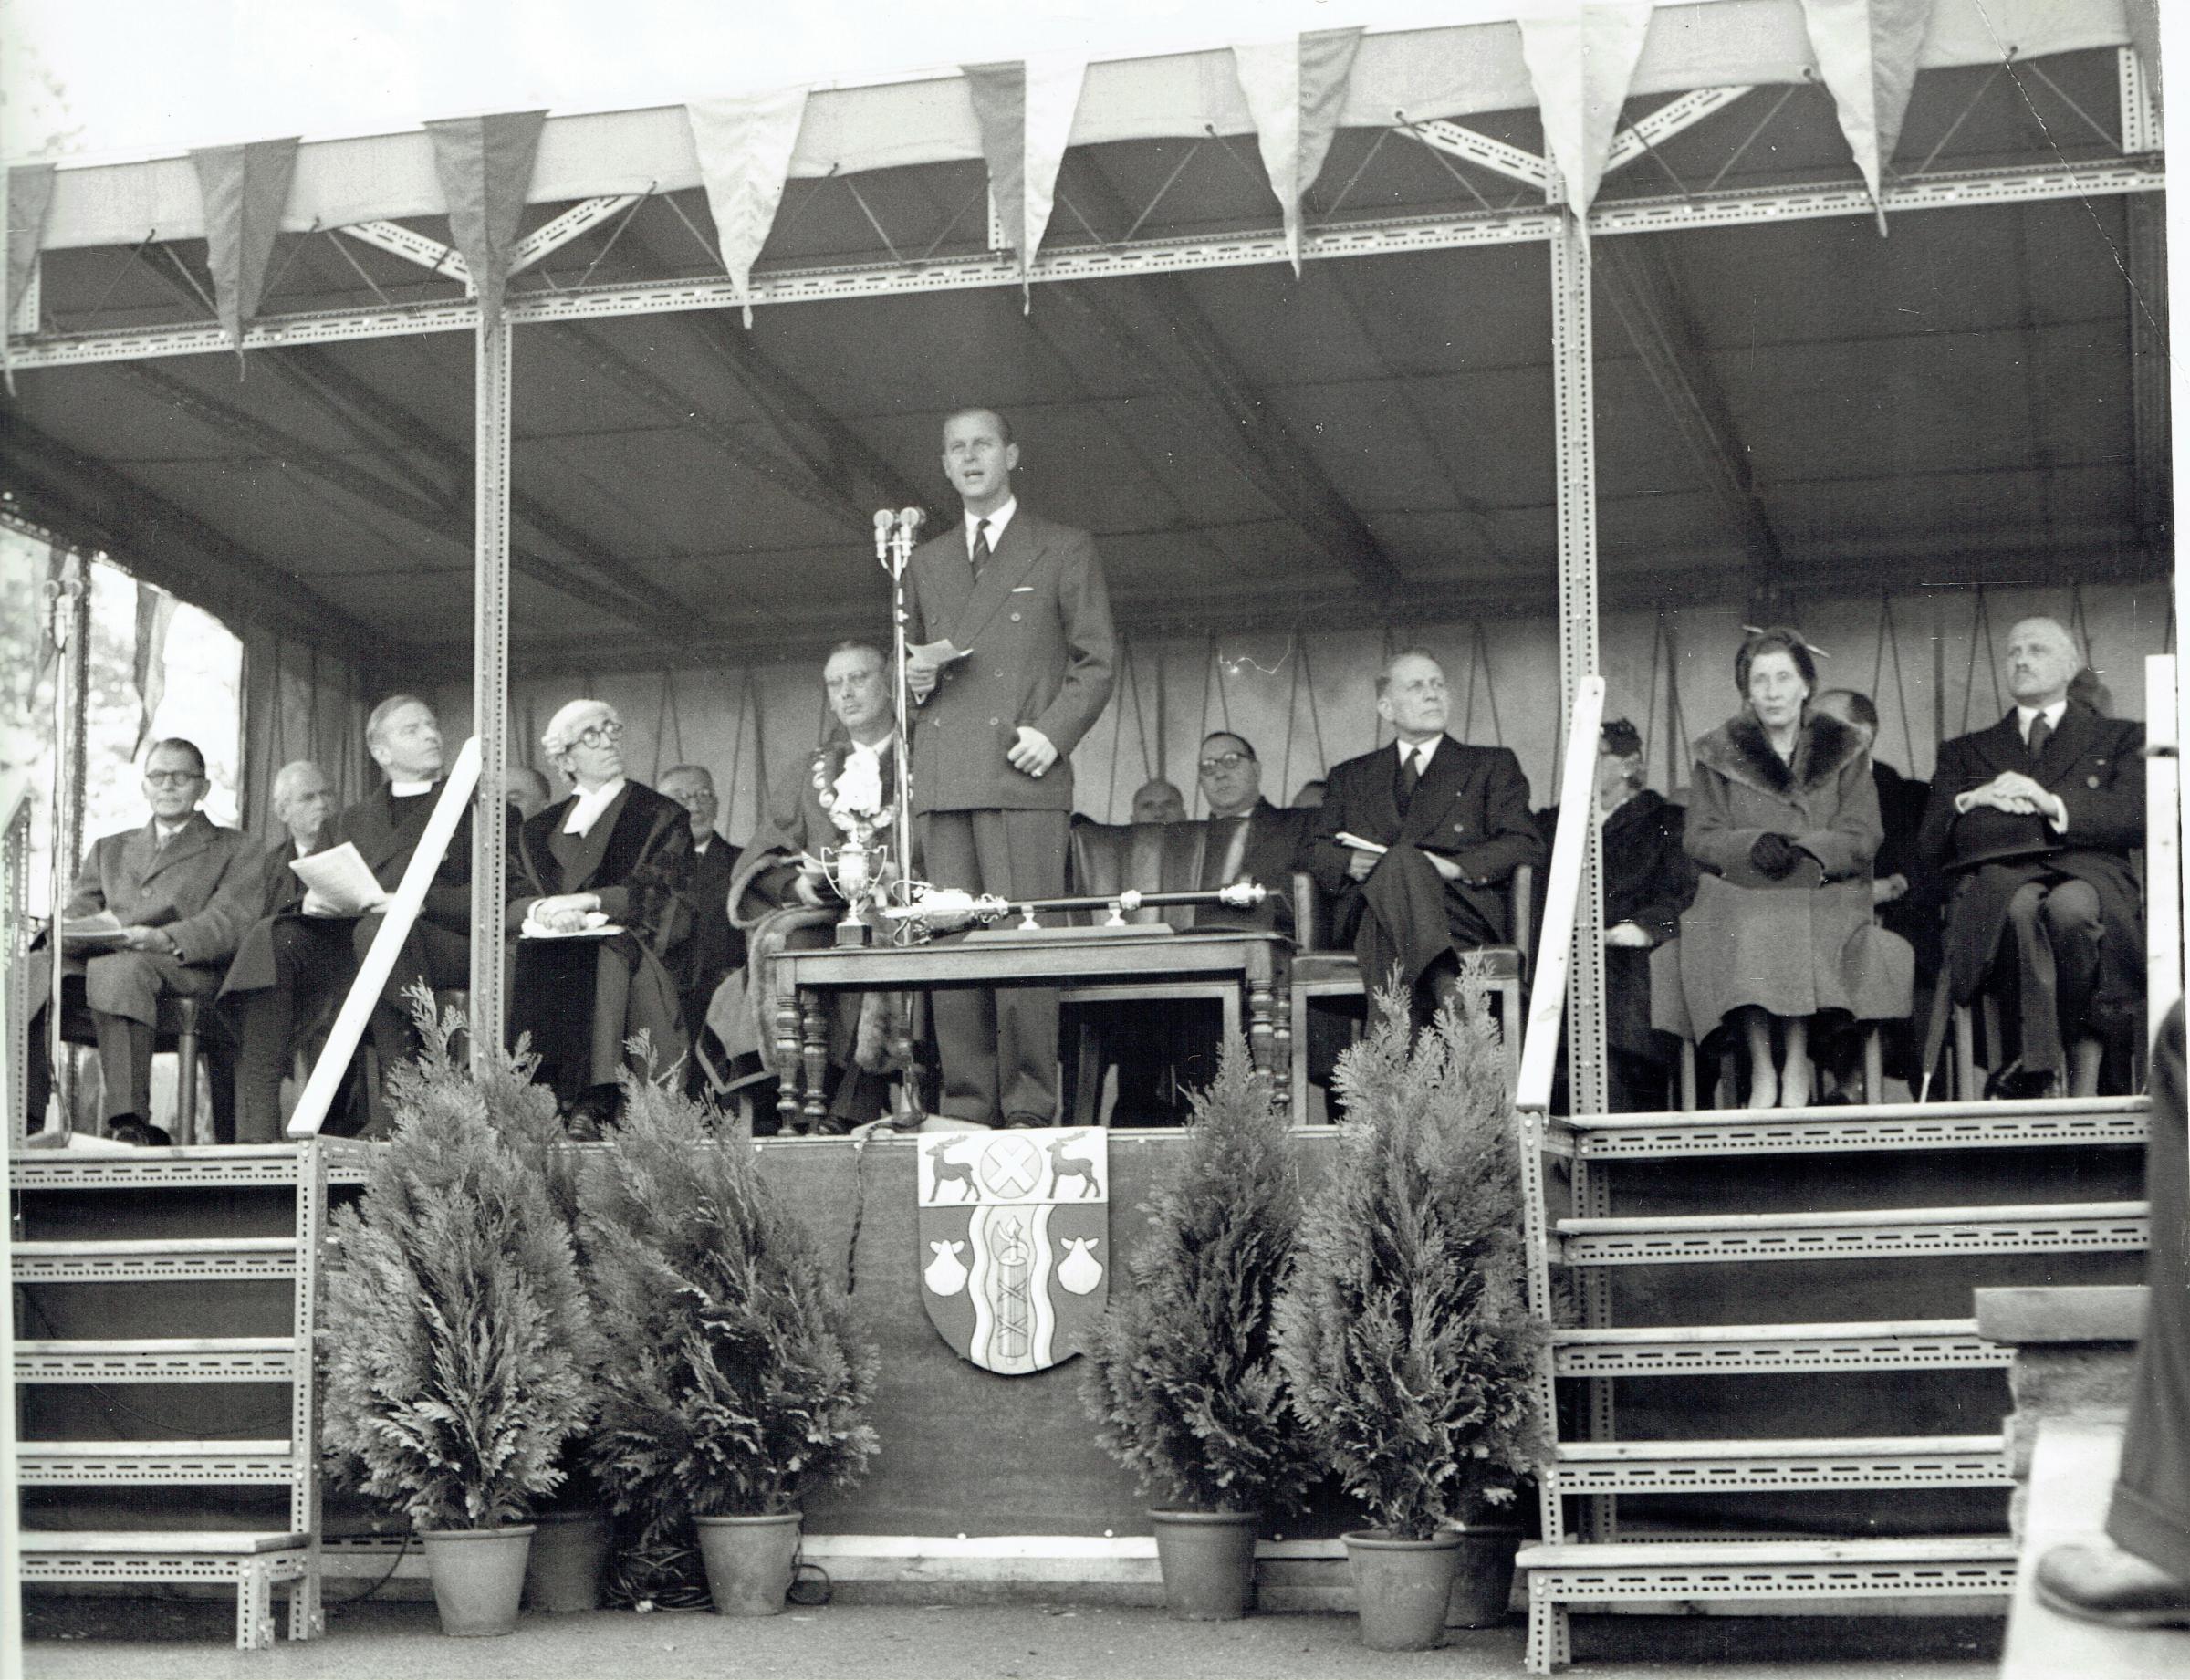 The Duke speaks to crowds who had gathered to see him open the new playing fields. Credit: Watford Museum